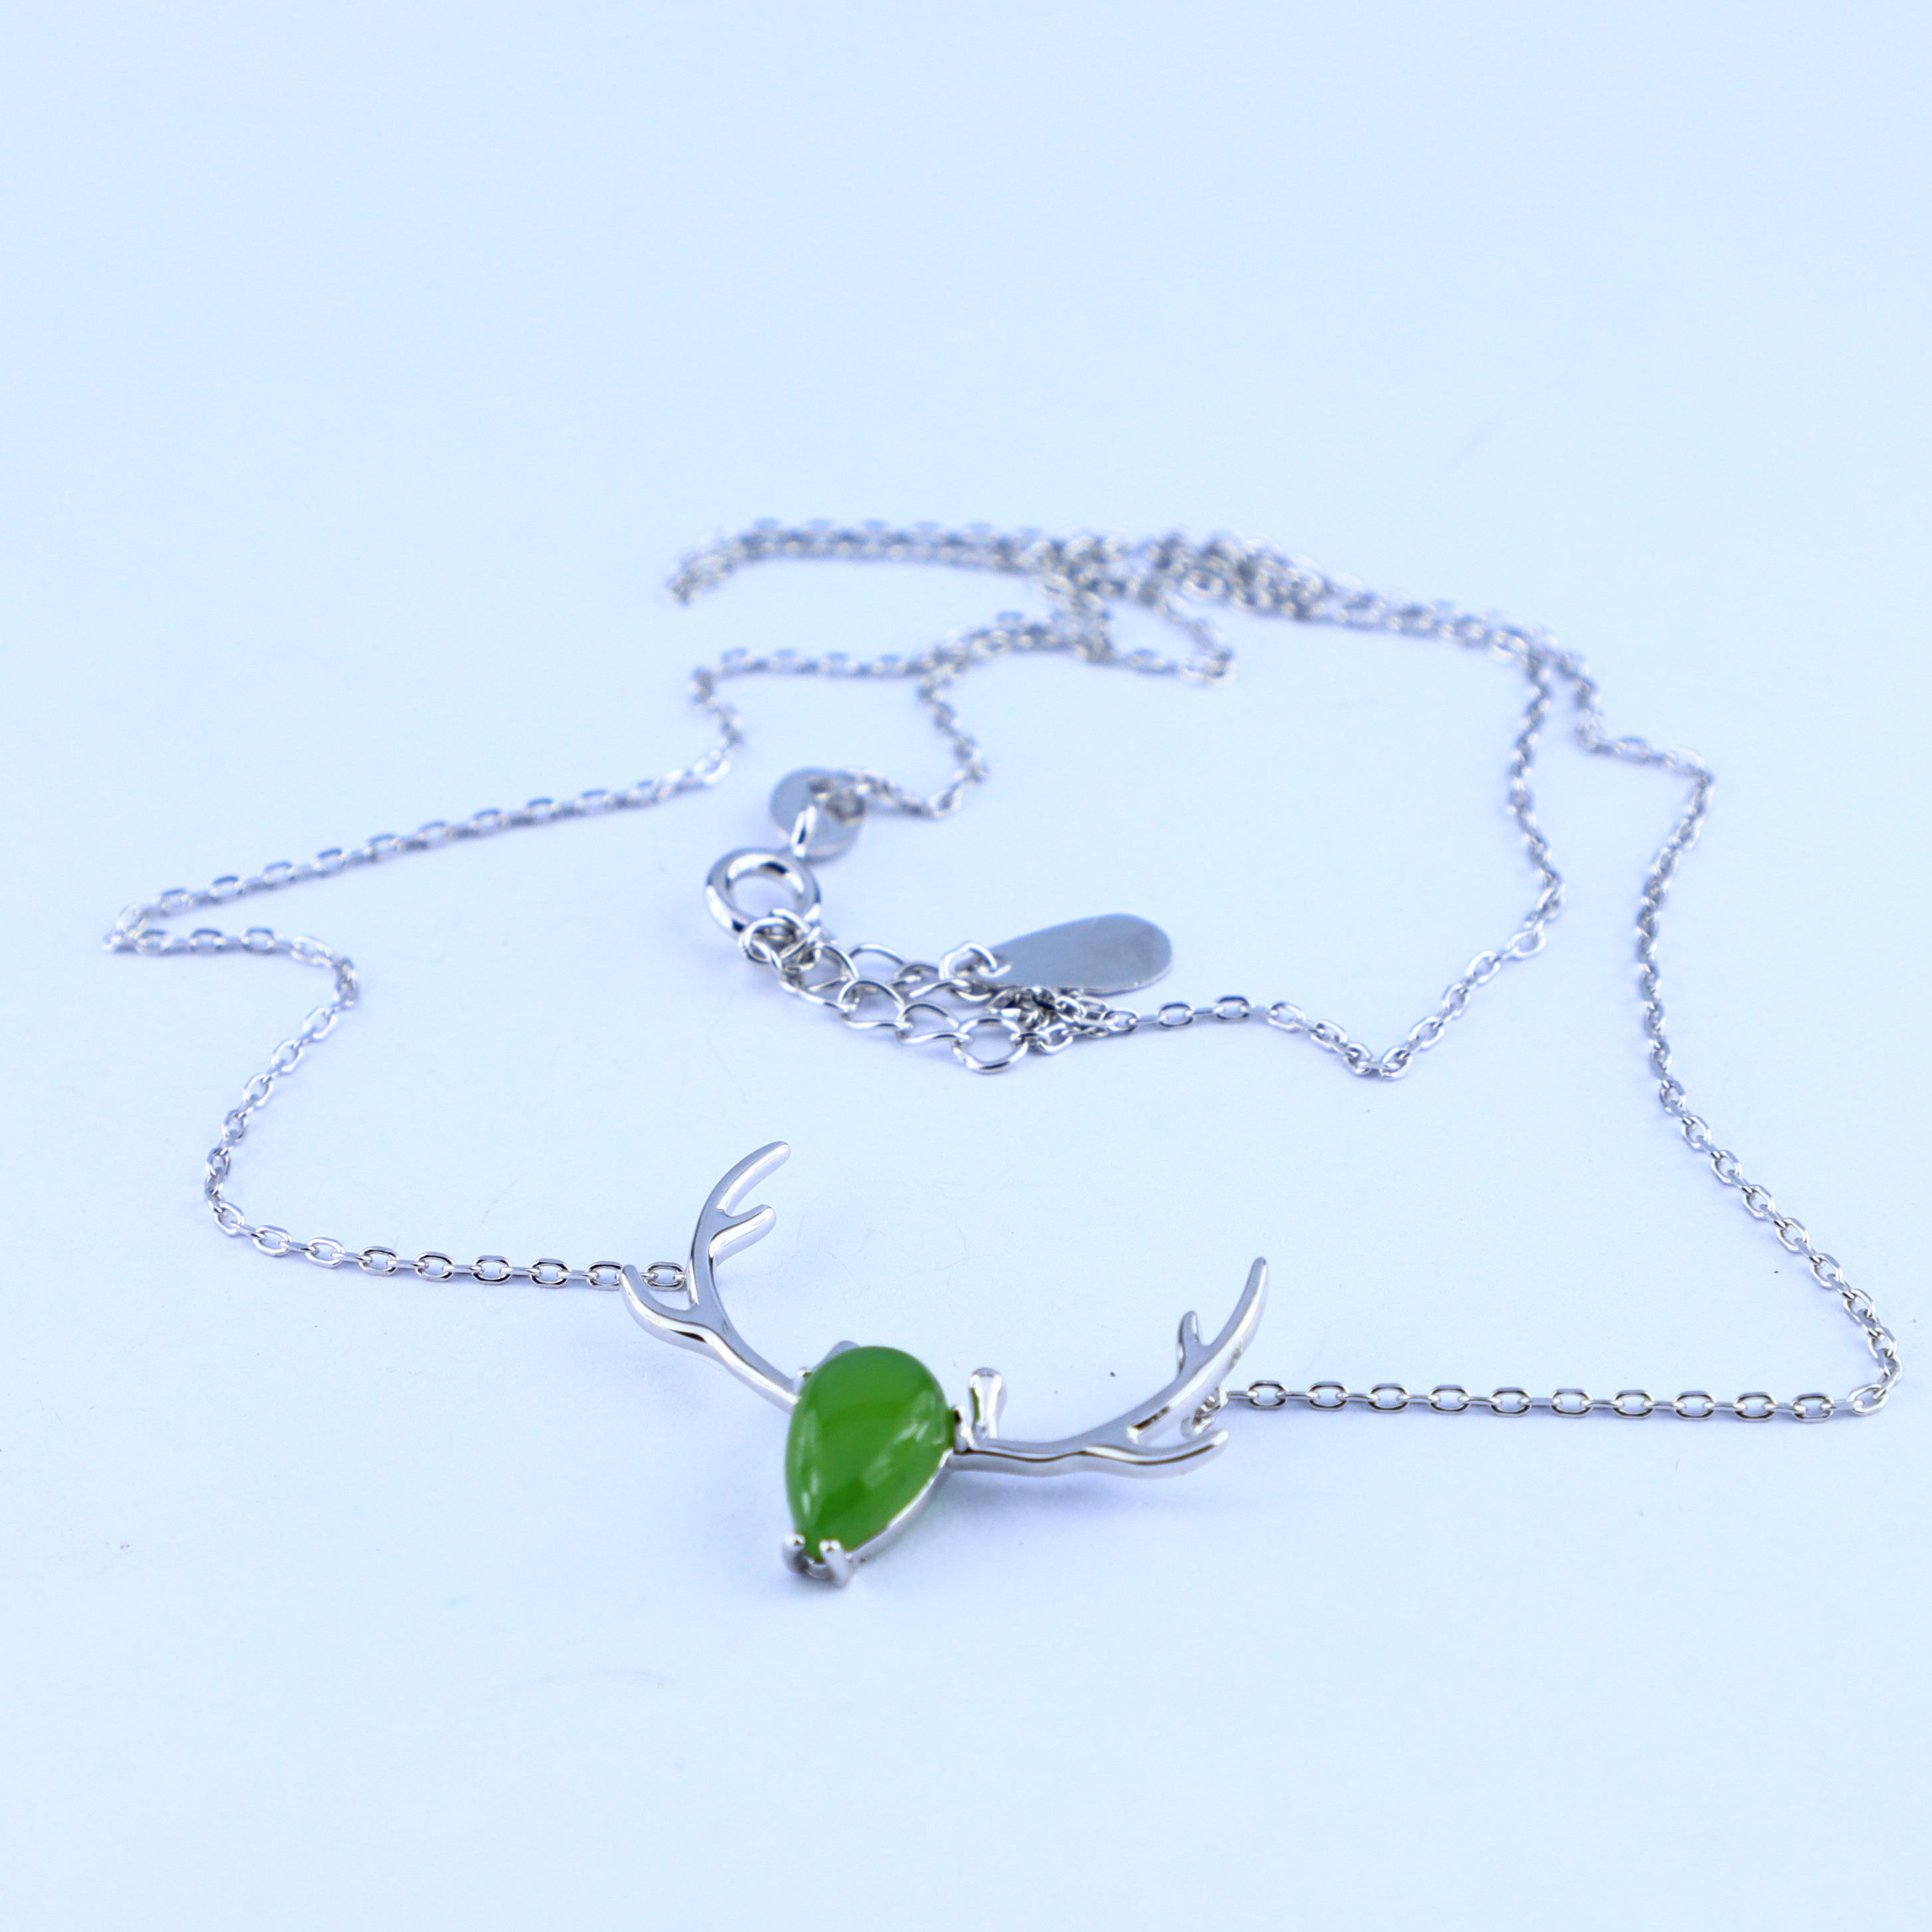 N9174 Nephrite Necklace